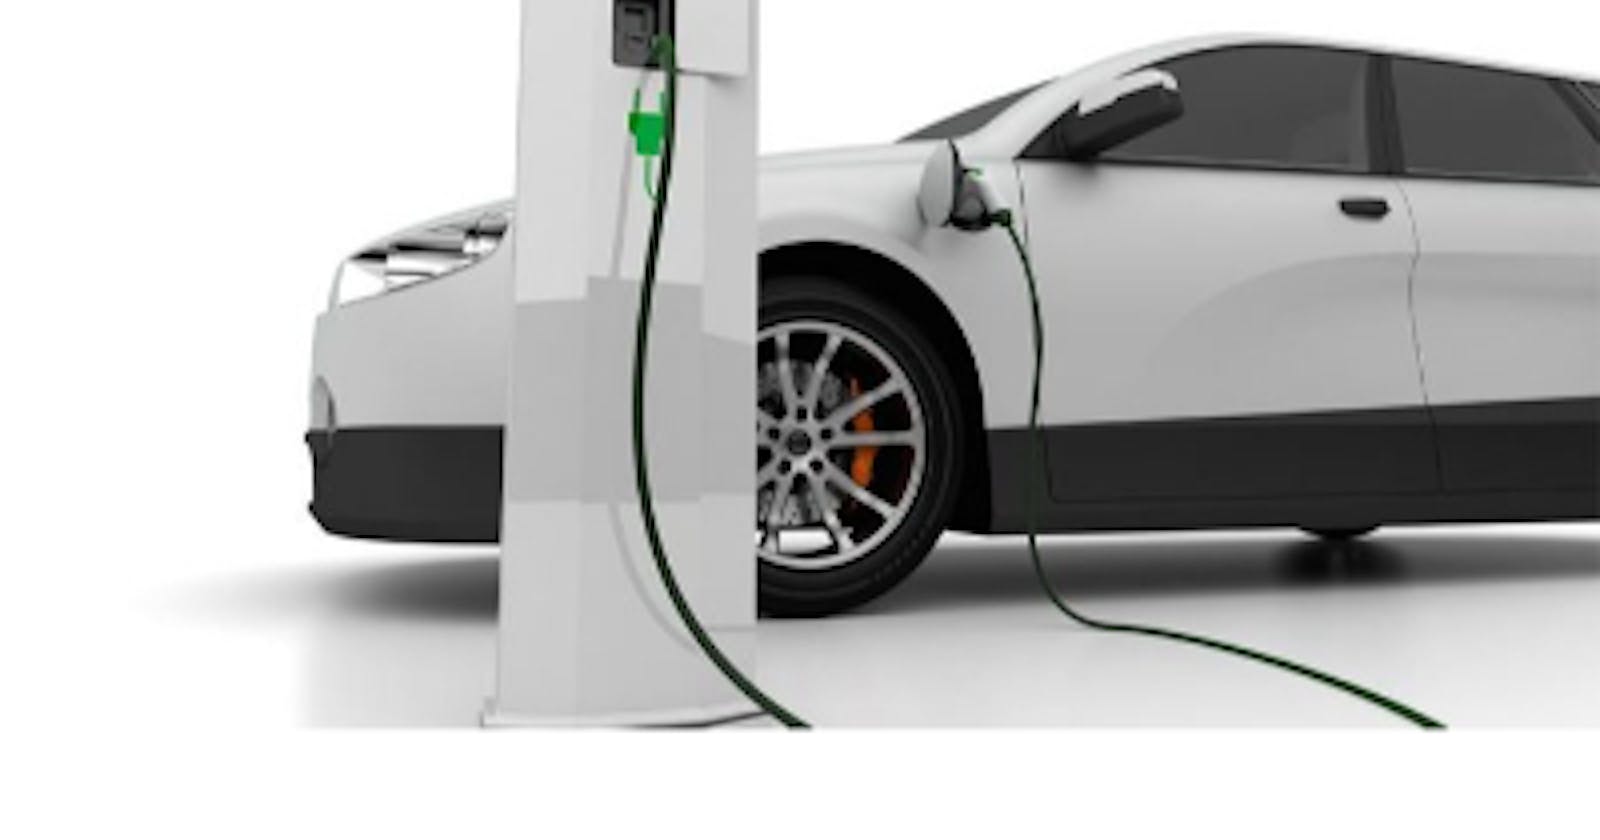 Electric Vehicles Adhesives Market: Electric Vehicles Adhesives To Grow at 45.1% CAGR During 2021-2028